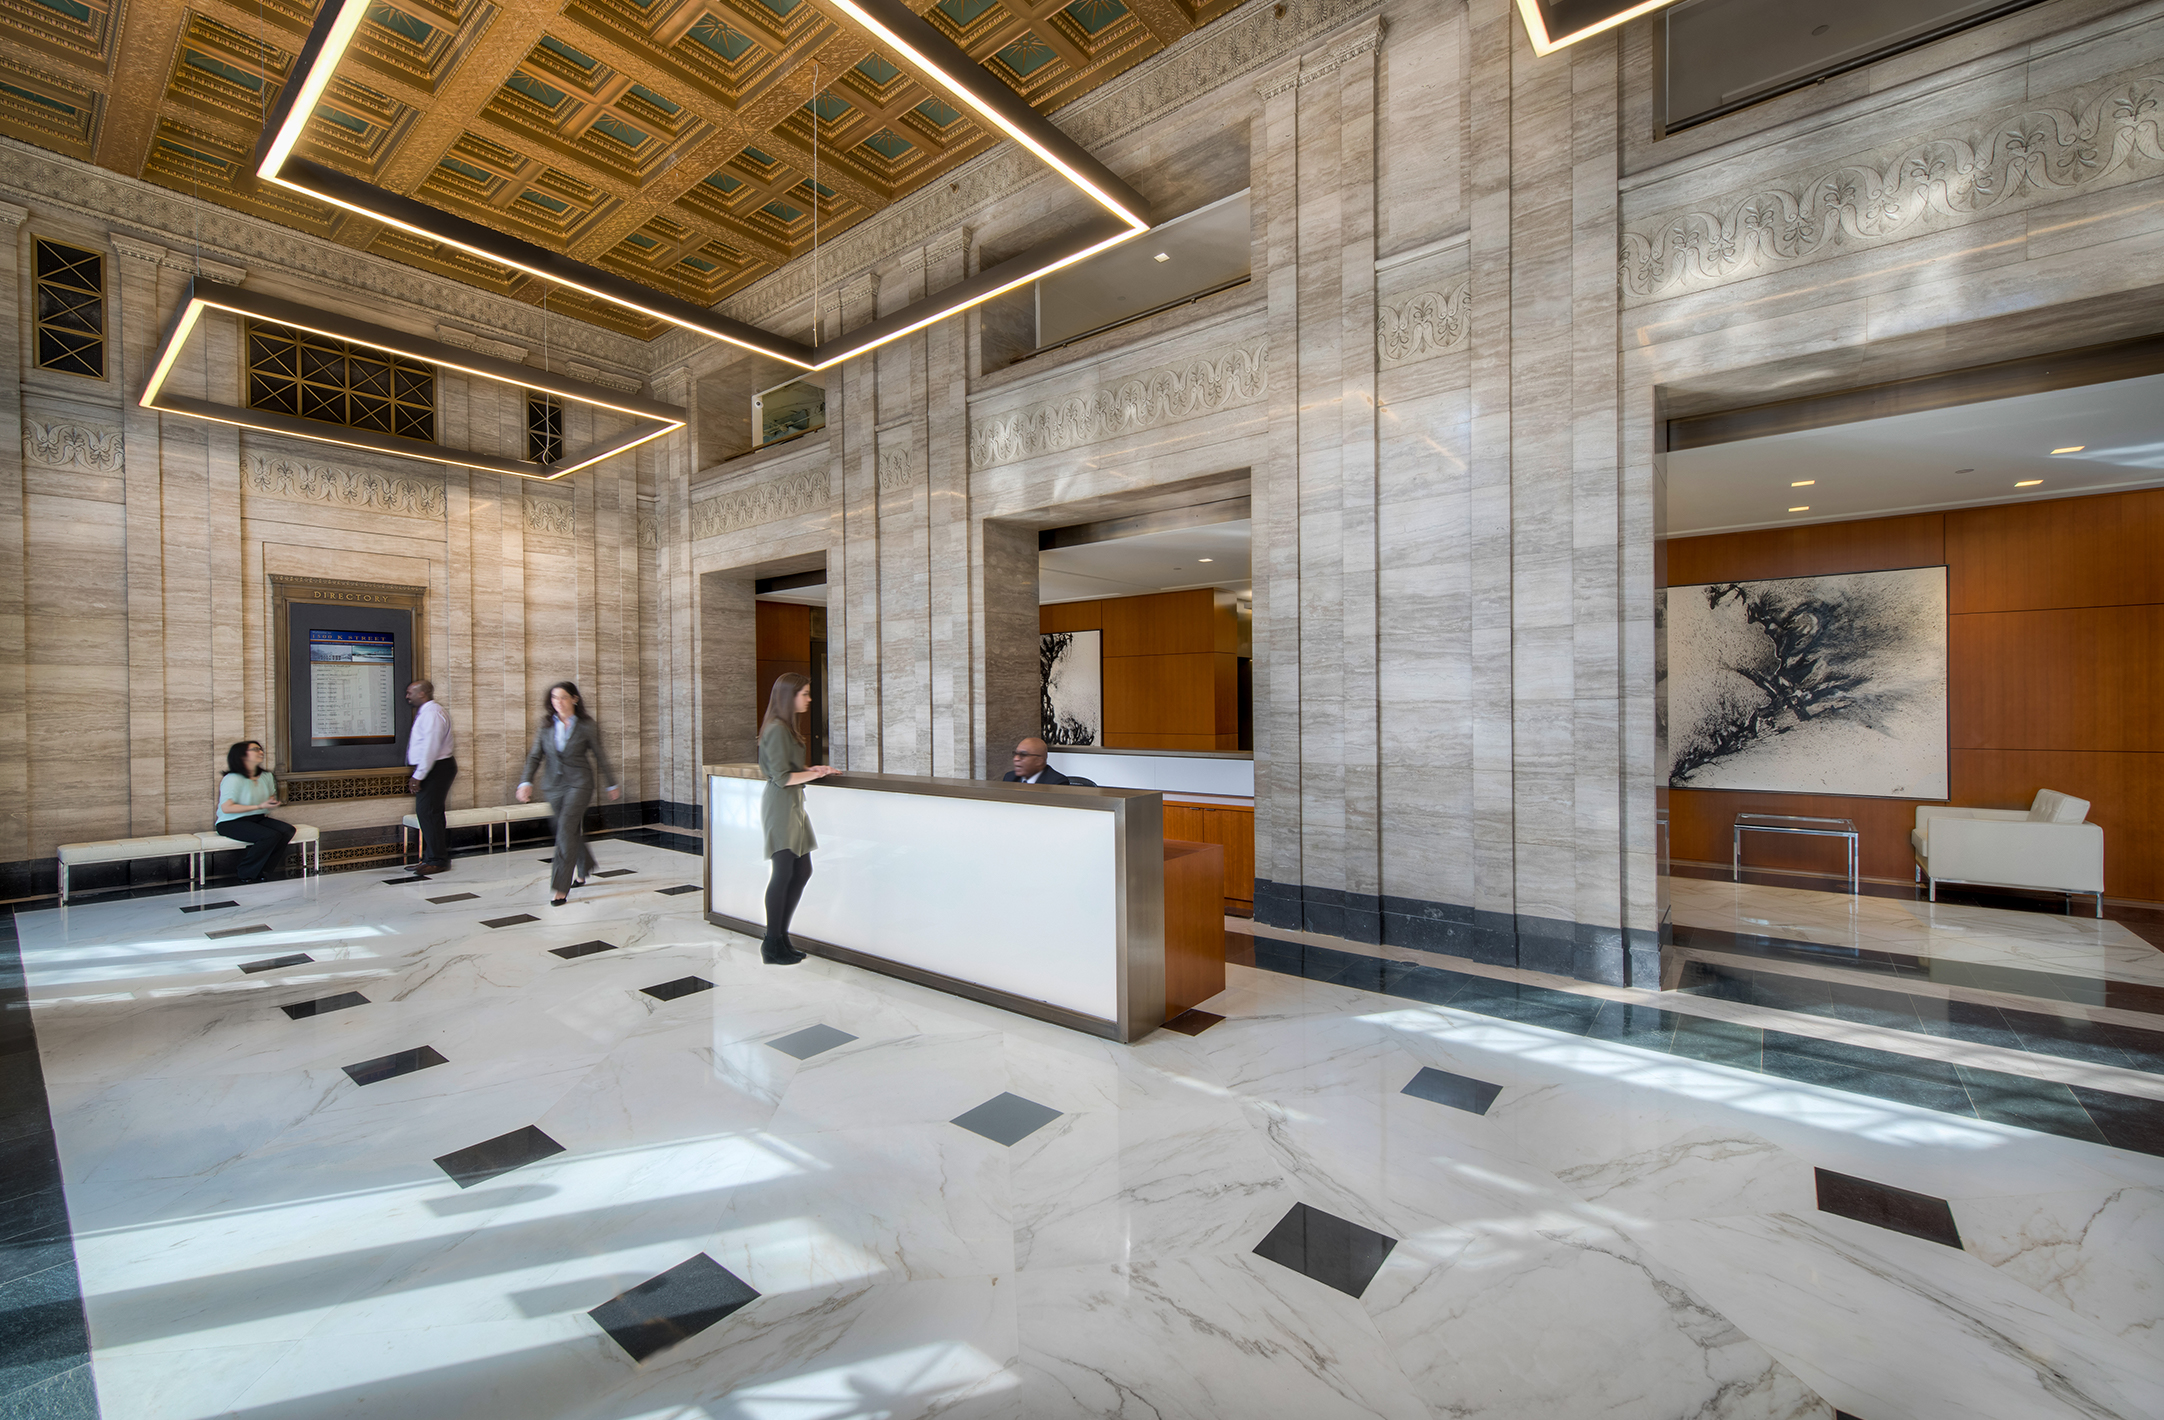 Image of the main lobby of the 1500 K Street DC office building, including restored ceiling and marble finishes